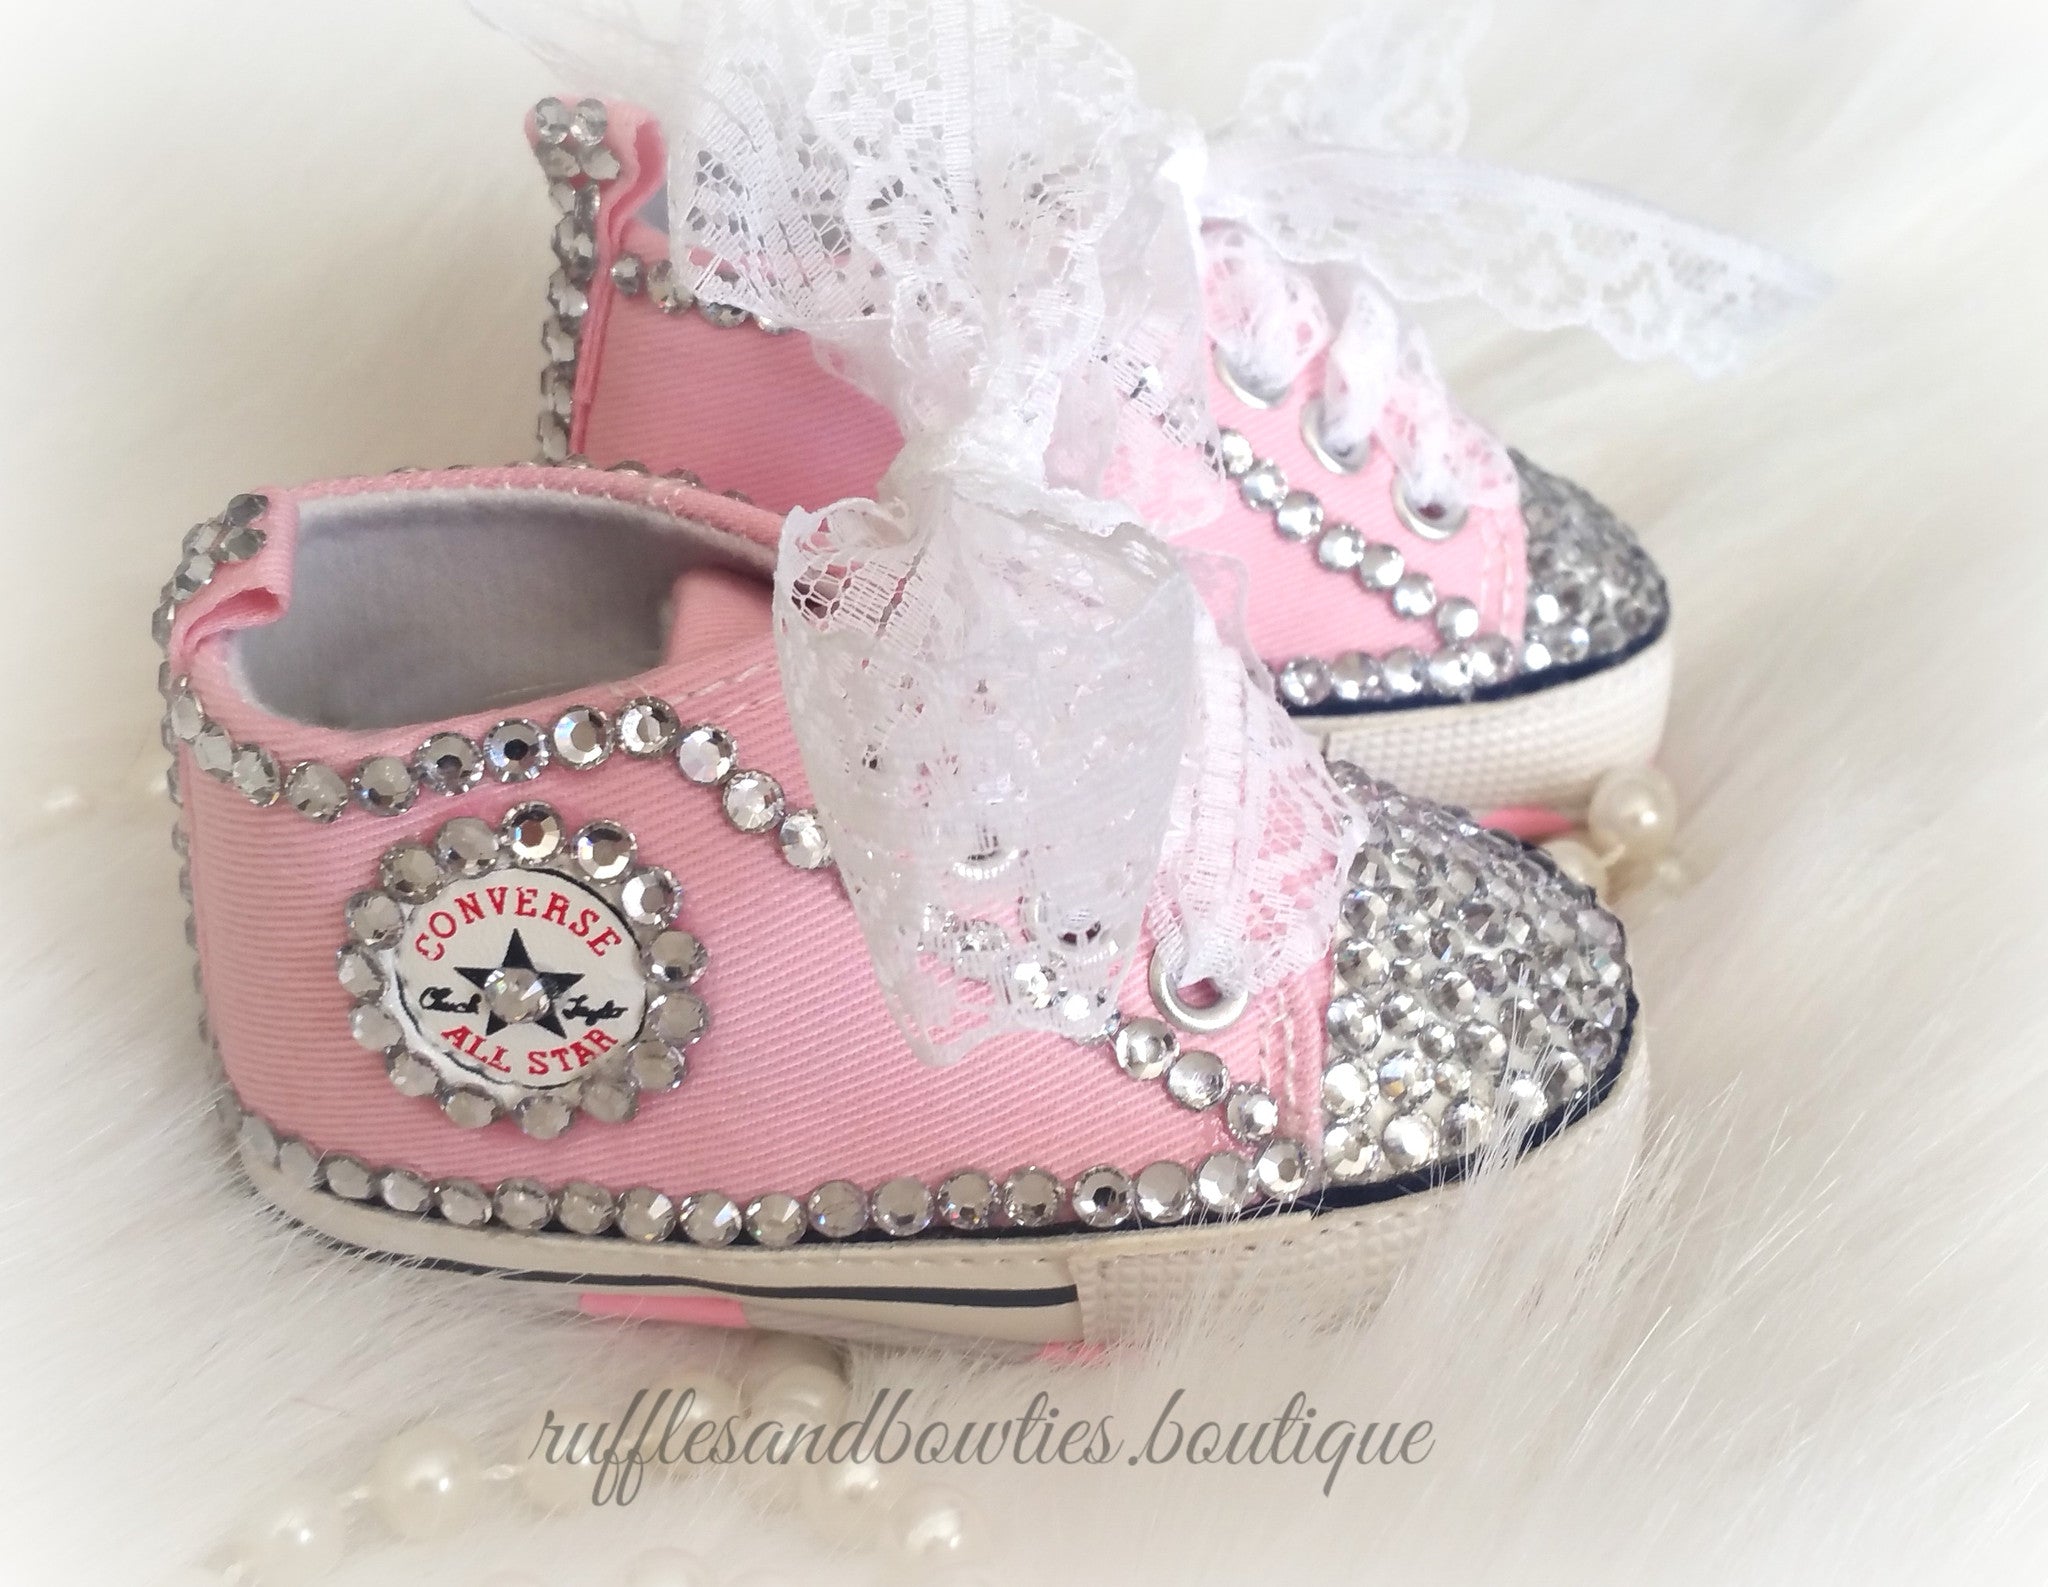 Baby Girl Crystal Converse Shoes - Pink High tops blinged out with Crystals and Lace for Ribbons